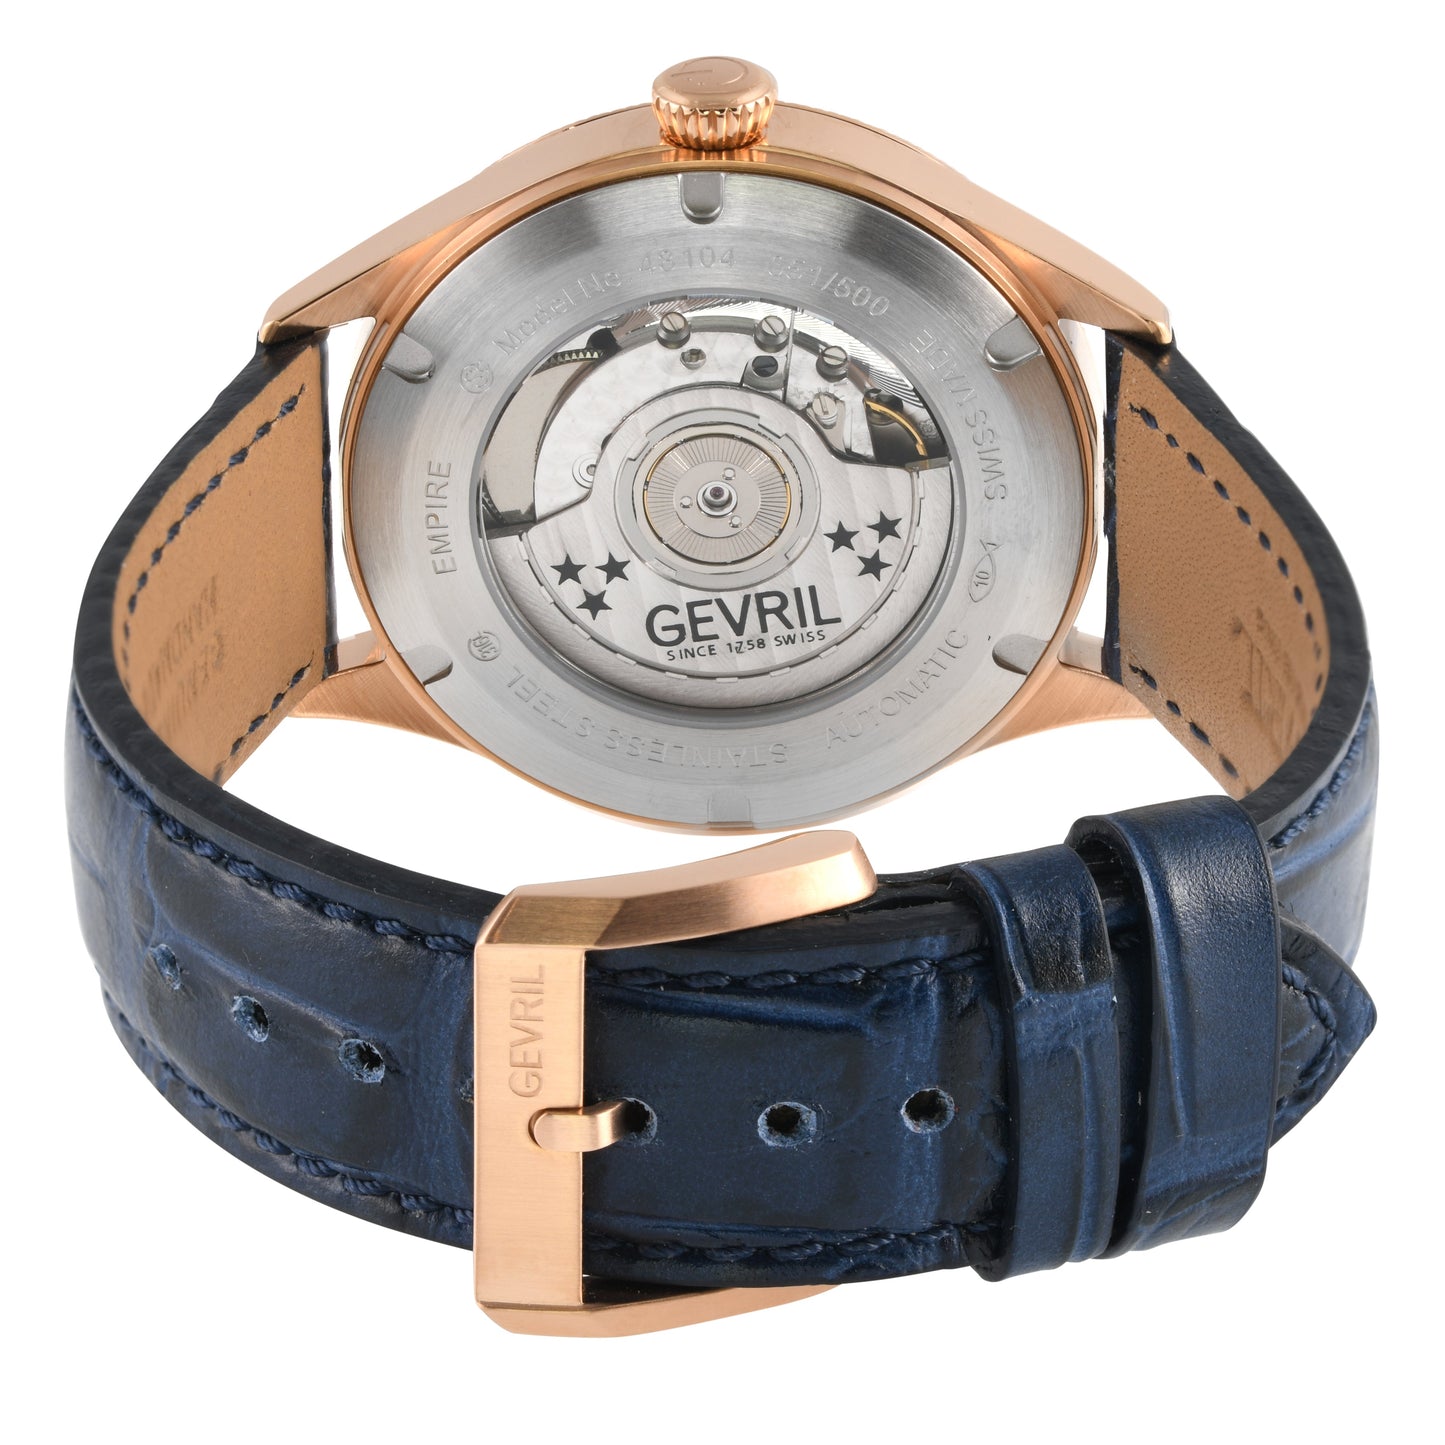 Gevril-Luxury-Swiss-Watches-Gevril Empire-48104